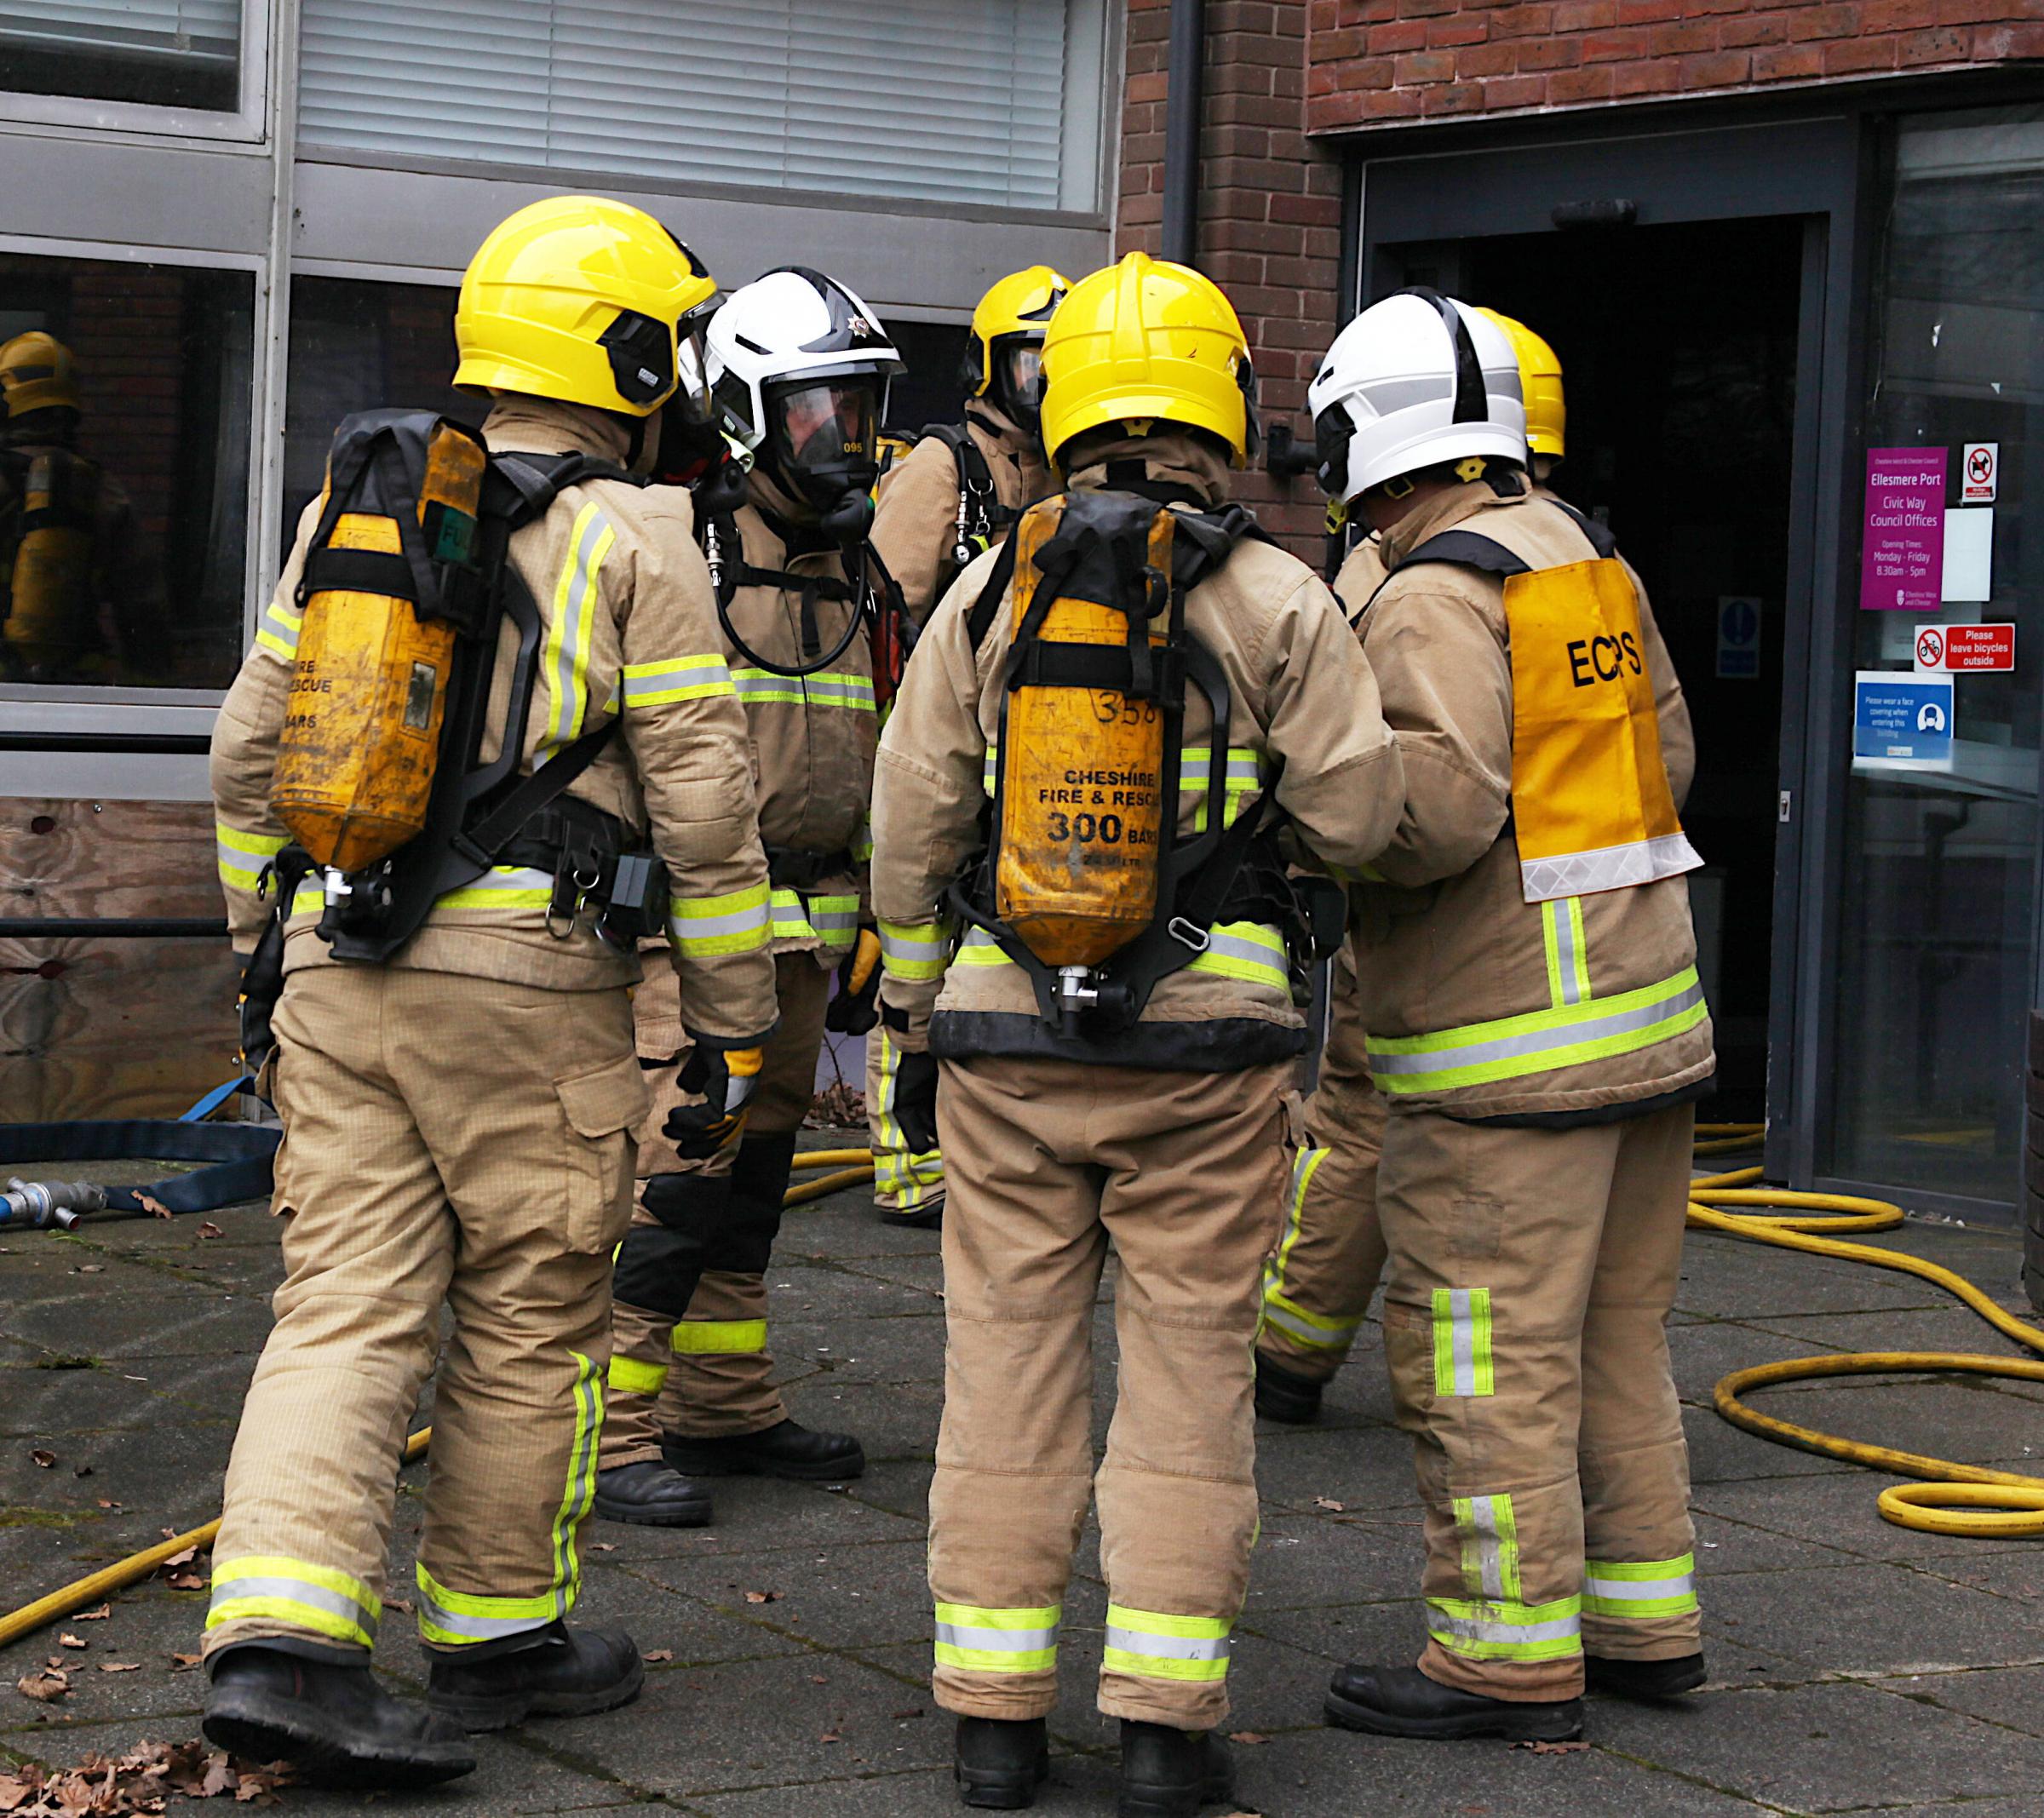 Firefighters are briefed about the hazards they can expect to find inside the building. Picture: Tom Ormiston.